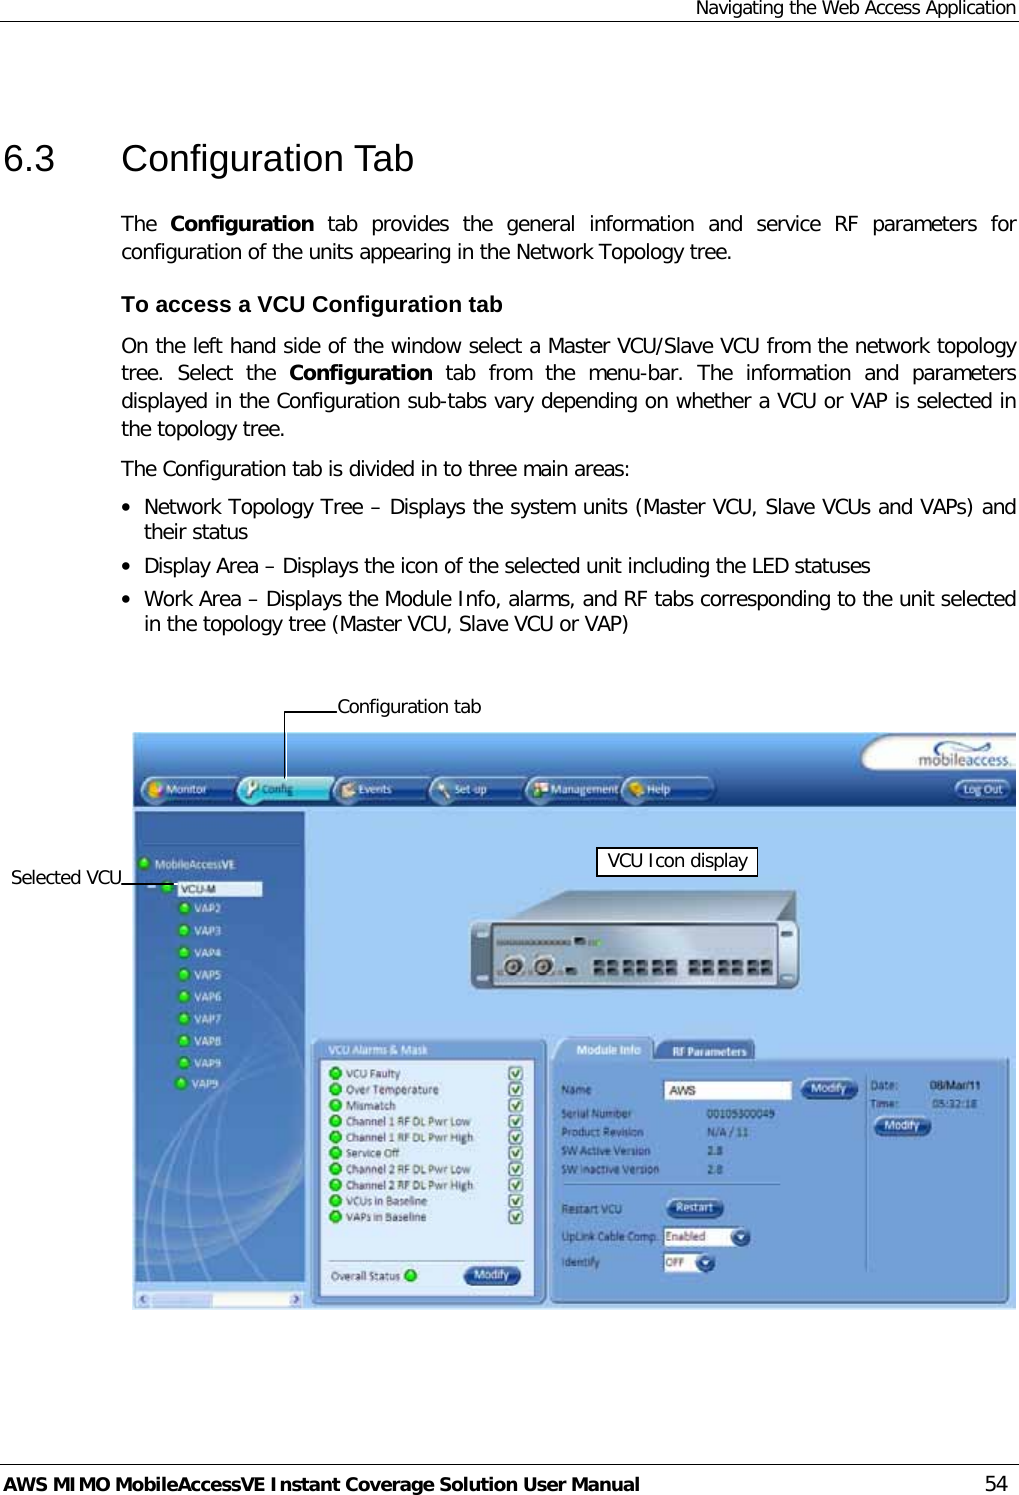 Navigating the Web Access Application AWS MIMO MobileAccessVE Instant Coverage Solution User Manual  54  6.3  Configuration Tab The  Configuration  tab  provides the general information and service  RF parameters for configuration of the units appearing in the Network Topology tree.  To access a VCU Configuration tab On the left hand side of the window select a Master VCU/Slave VCU from the network topology tree.  Select the  Configuration  tab from the menu-bar. The information and parameters displayed in the Configuration sub-tabs vary depending on whether a VCU or VAP is selected in the topology tree. The Configuration tab is divided in to three main areas: • Network Topology Tree – Displays the system units (Master VCU, Slave VCUs and VAPs) and their status • Display Area – Displays the icon of the selected unit including the LED statuses • Work Area – Displays the Module Info, alarms, and RF tabs corresponding to the unit selected in the topology tree (Master VCU, Slave VCU or VAP)     Selected VCU VCU Icon display Configuration tab  